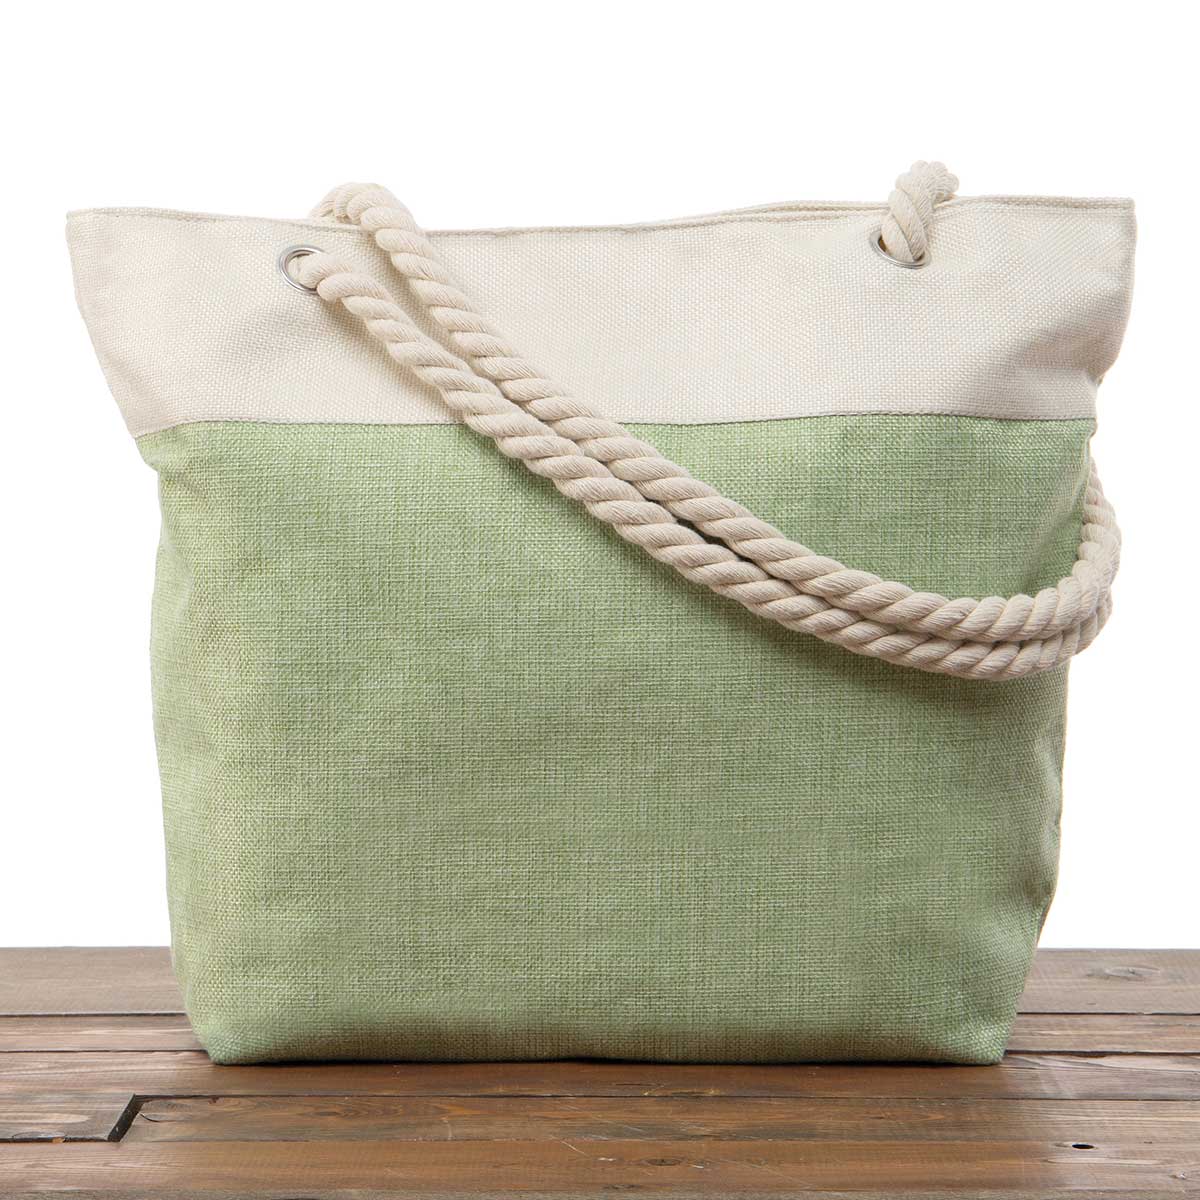 Green Canvas Summer Bag 17.5"x5"x14" with 10" Rope Shoulder Stra